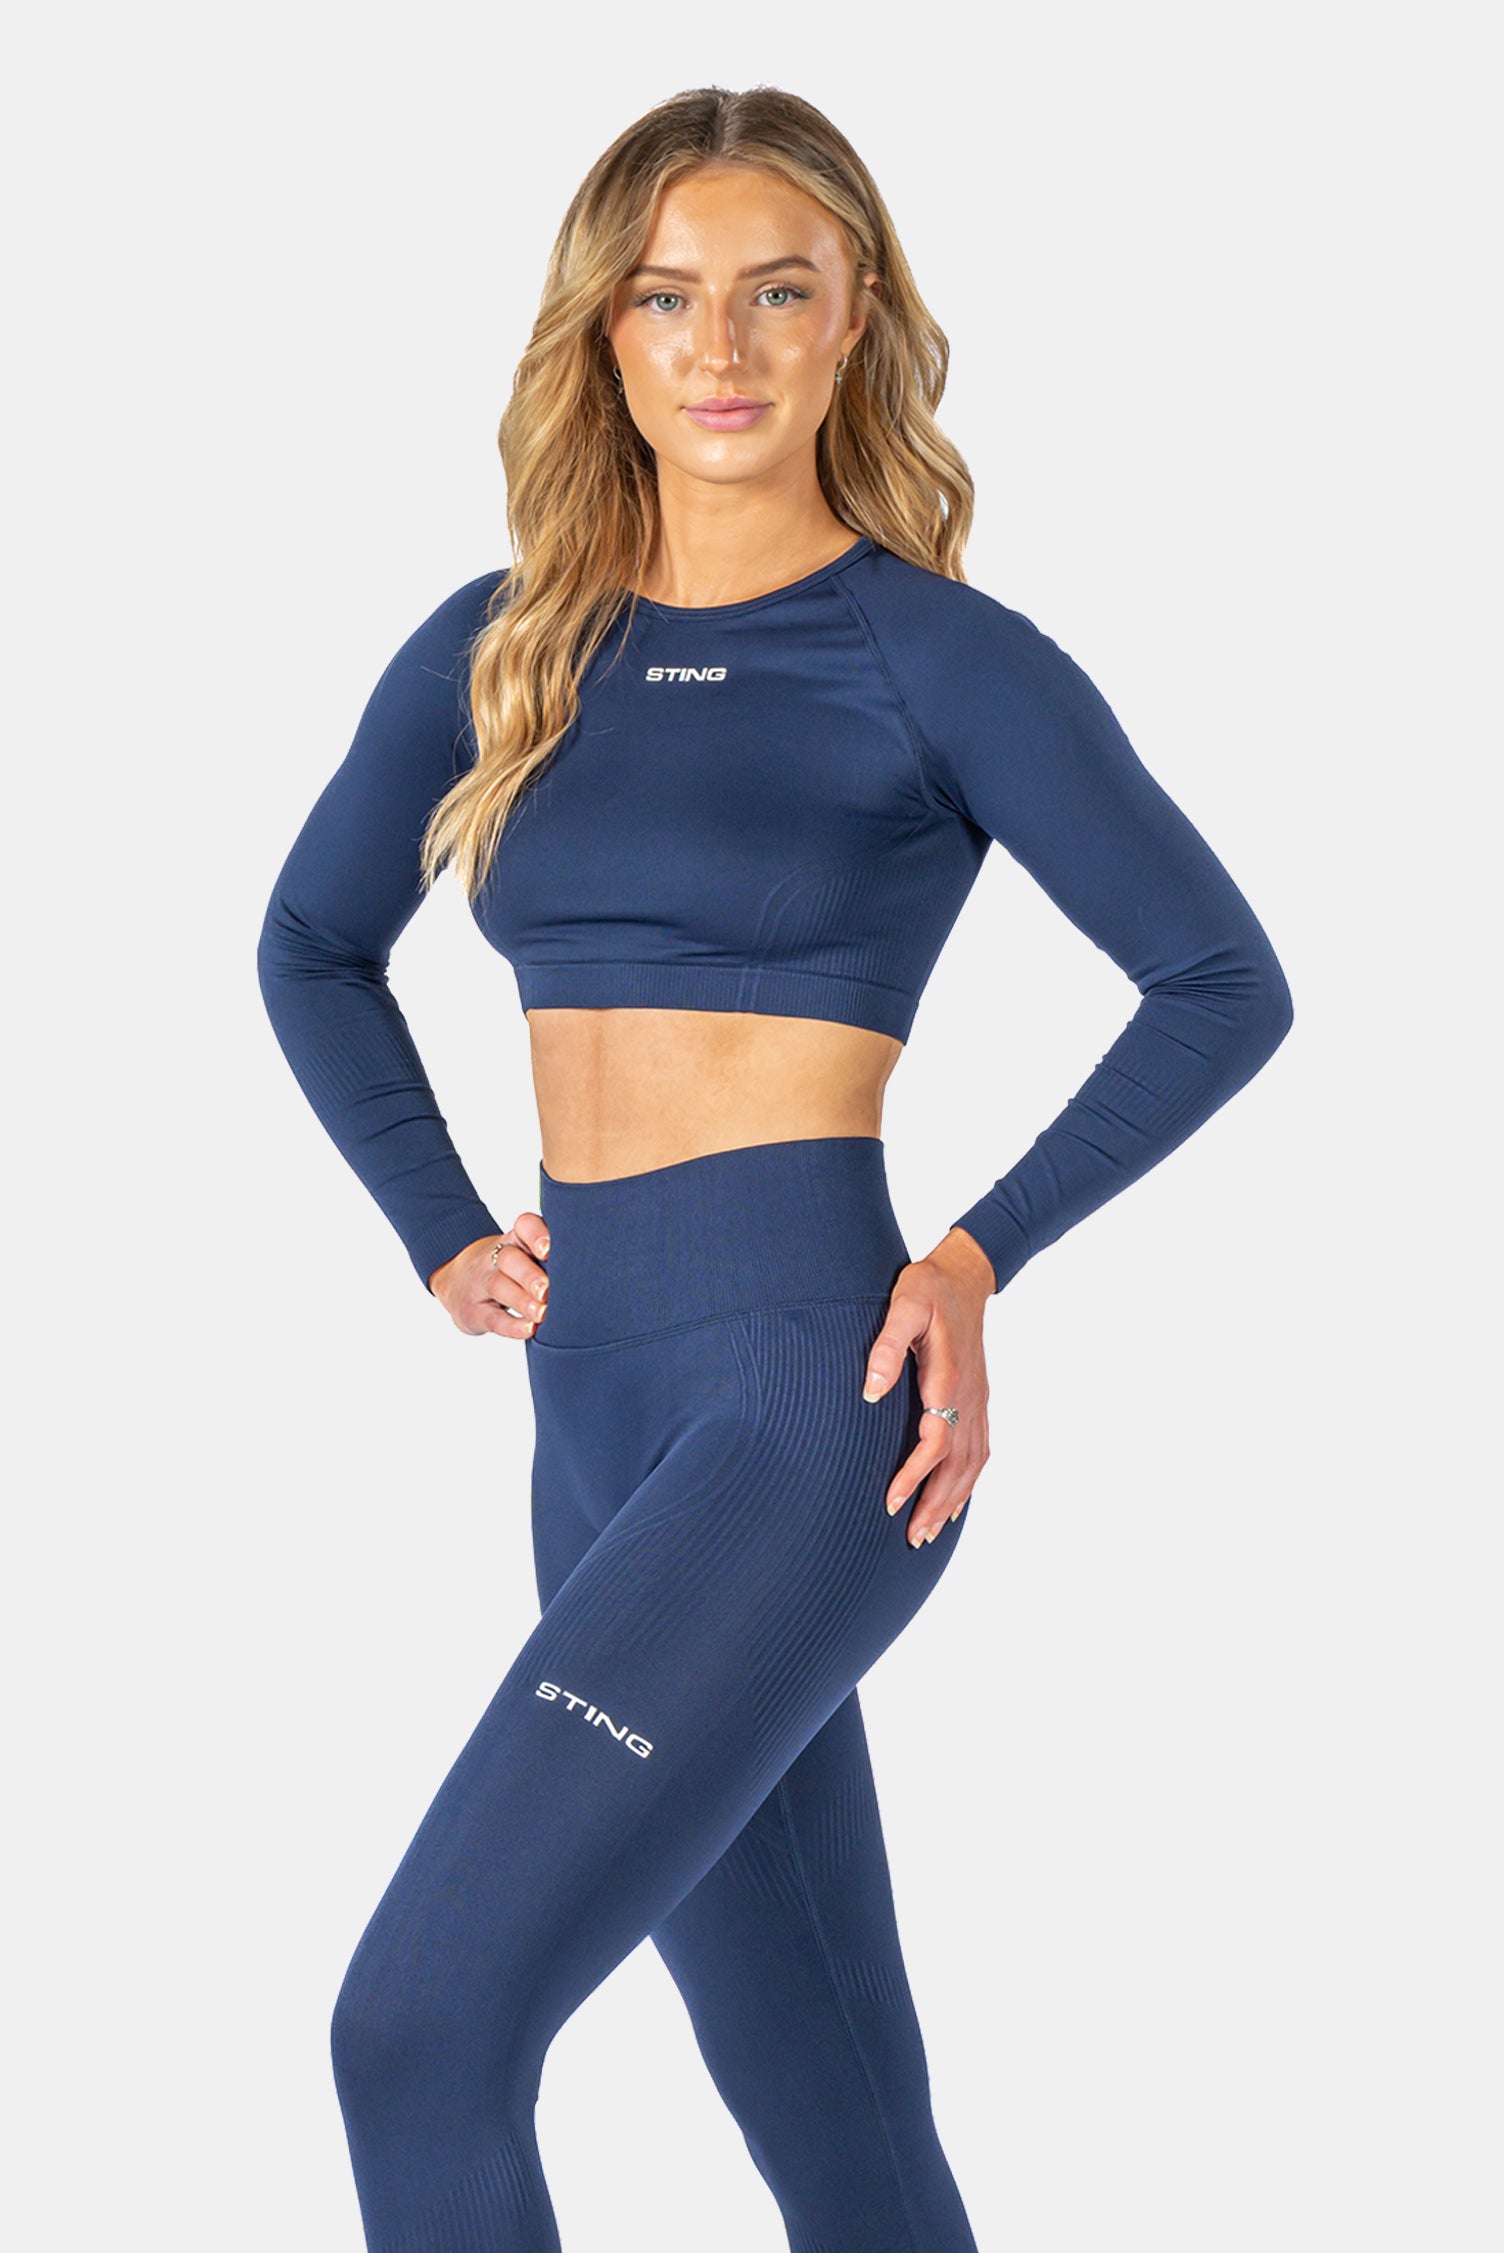 STING Allure Seamless Long Sleeve Navy